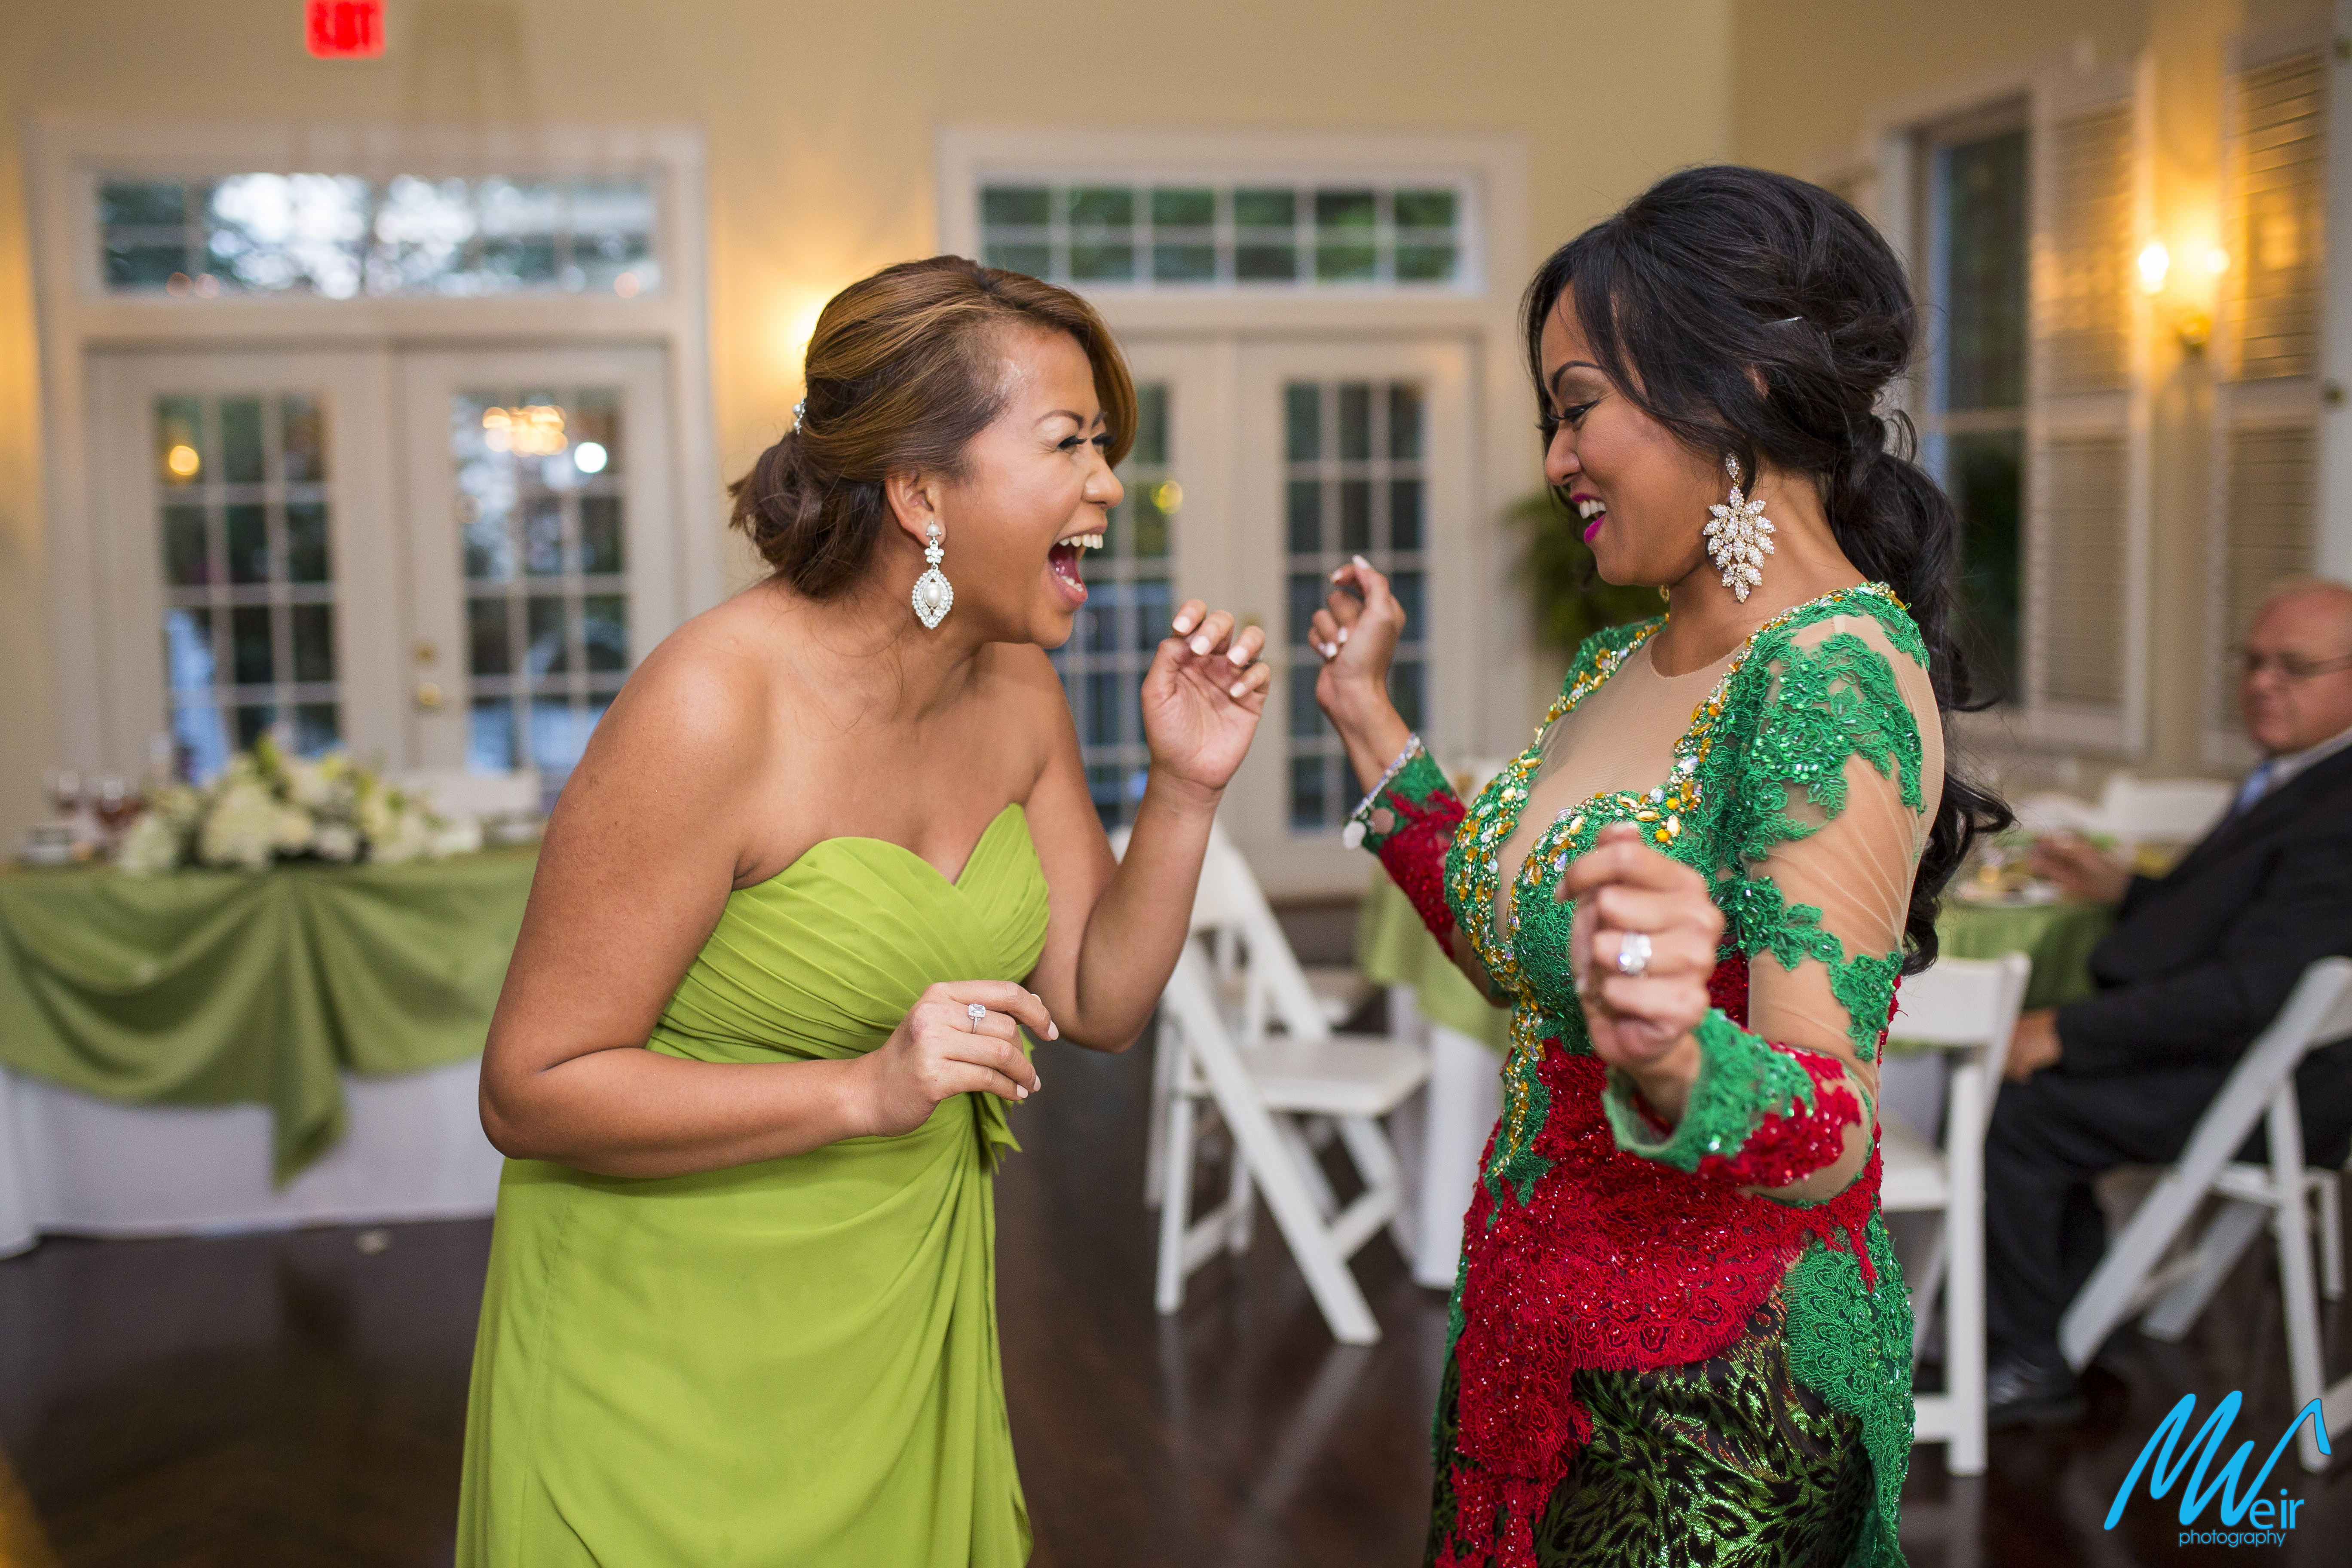 bride and maid of honor laugh and dance together at wedding reception